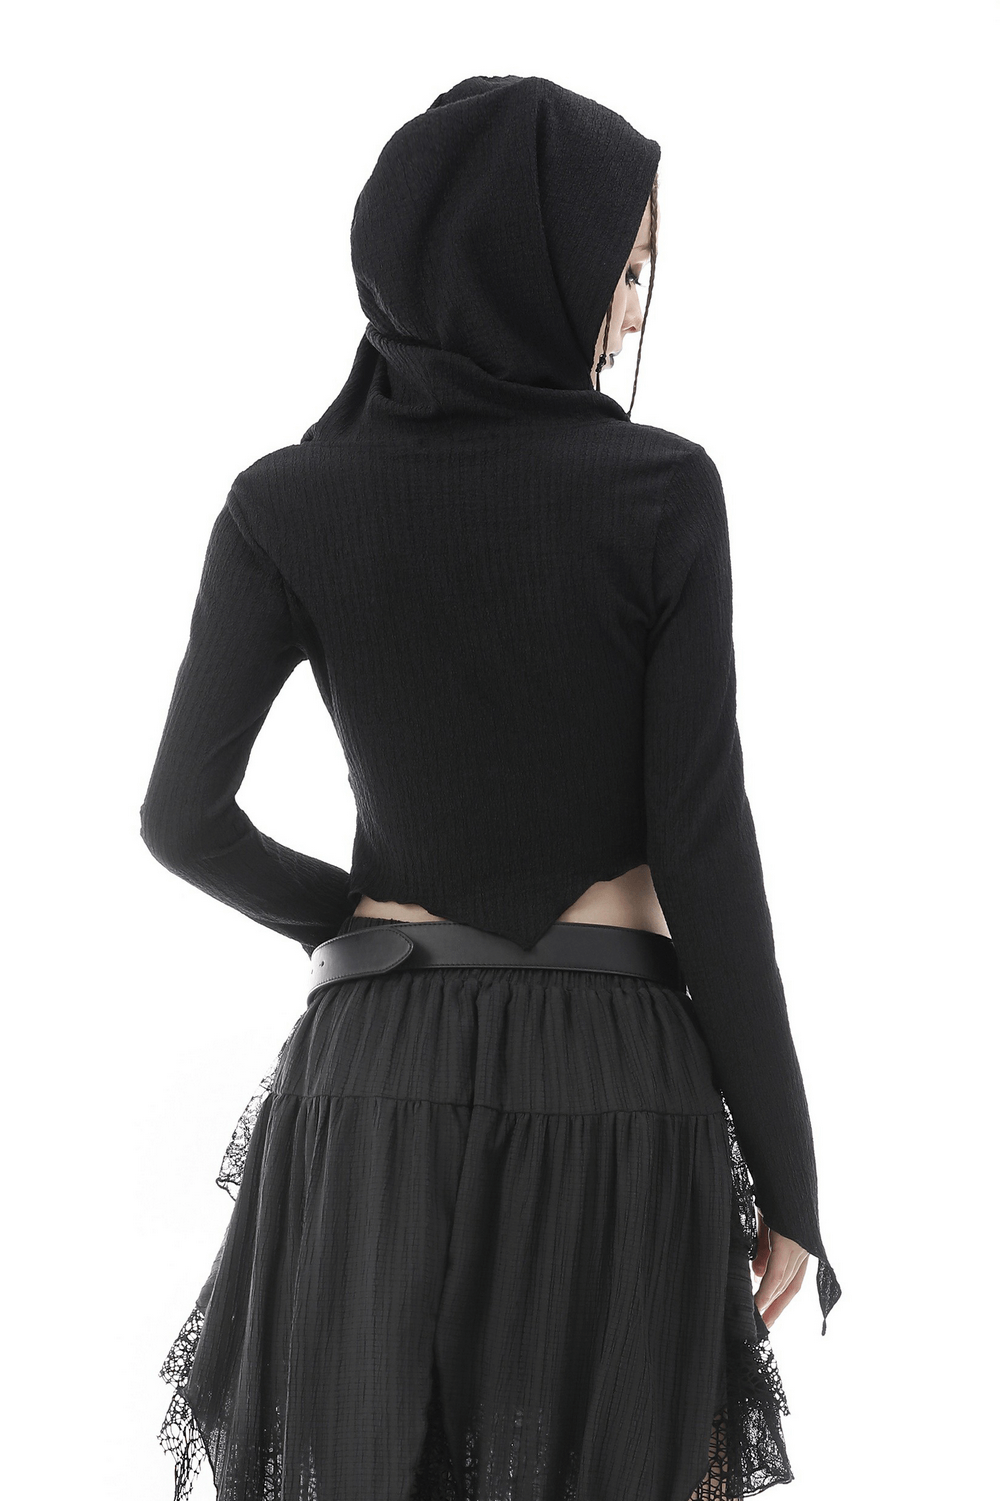 Gothic Black Hooded Crop Top with Lace Detailing